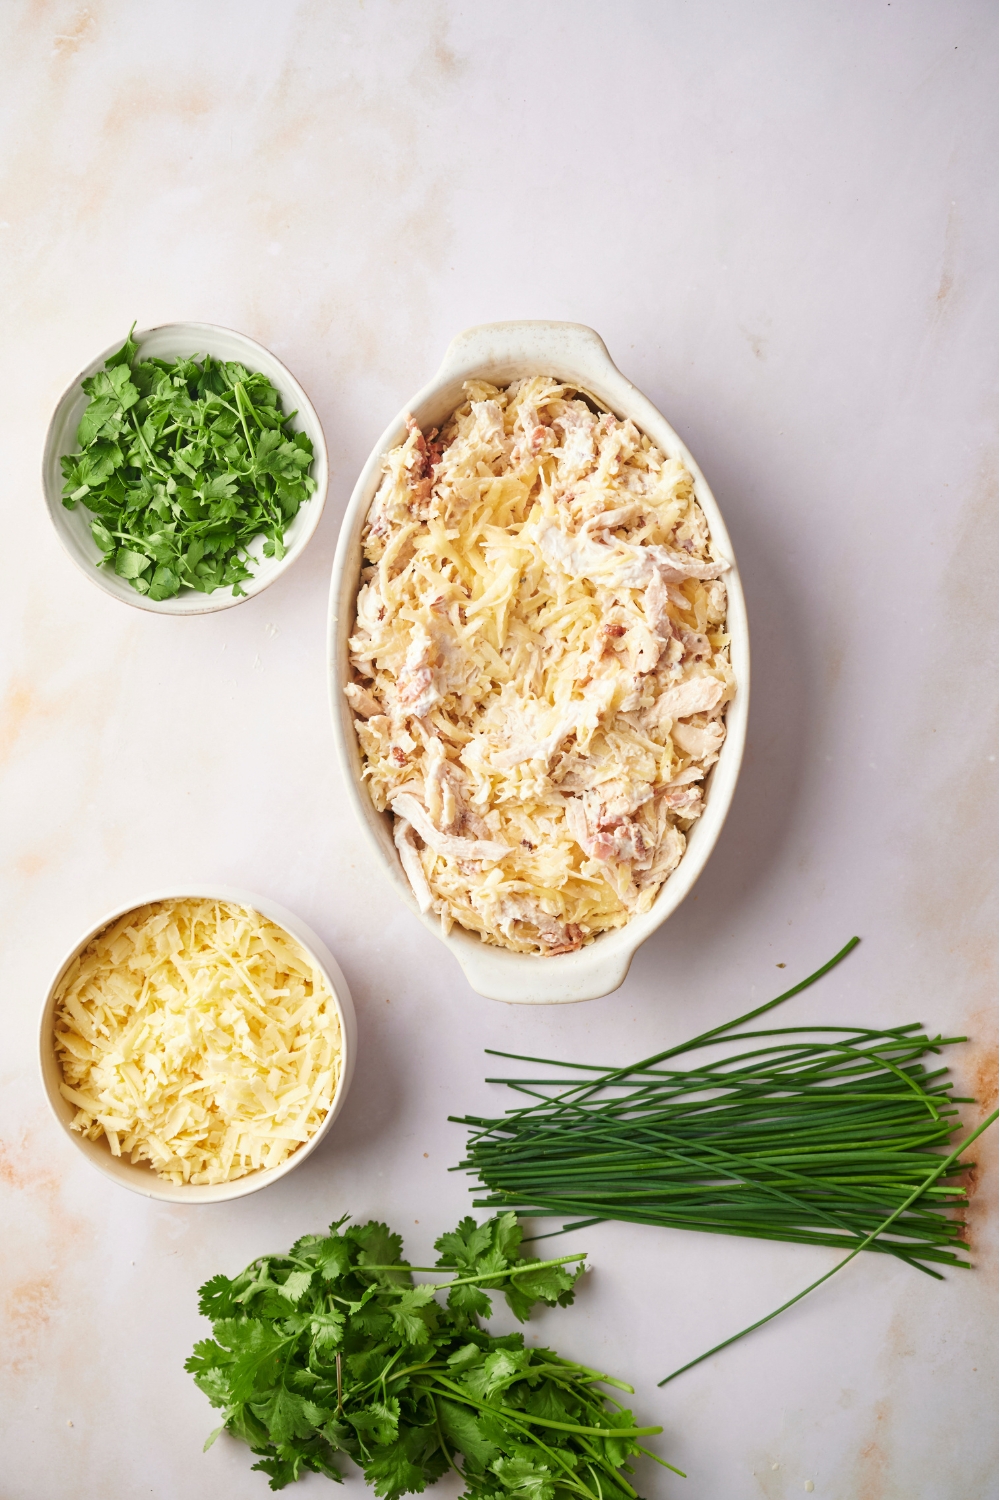 White casserole dish with unbaked chicken hashbrown casserole surrounded by ingredients including fresh herbs, chives, and shredded cheese.